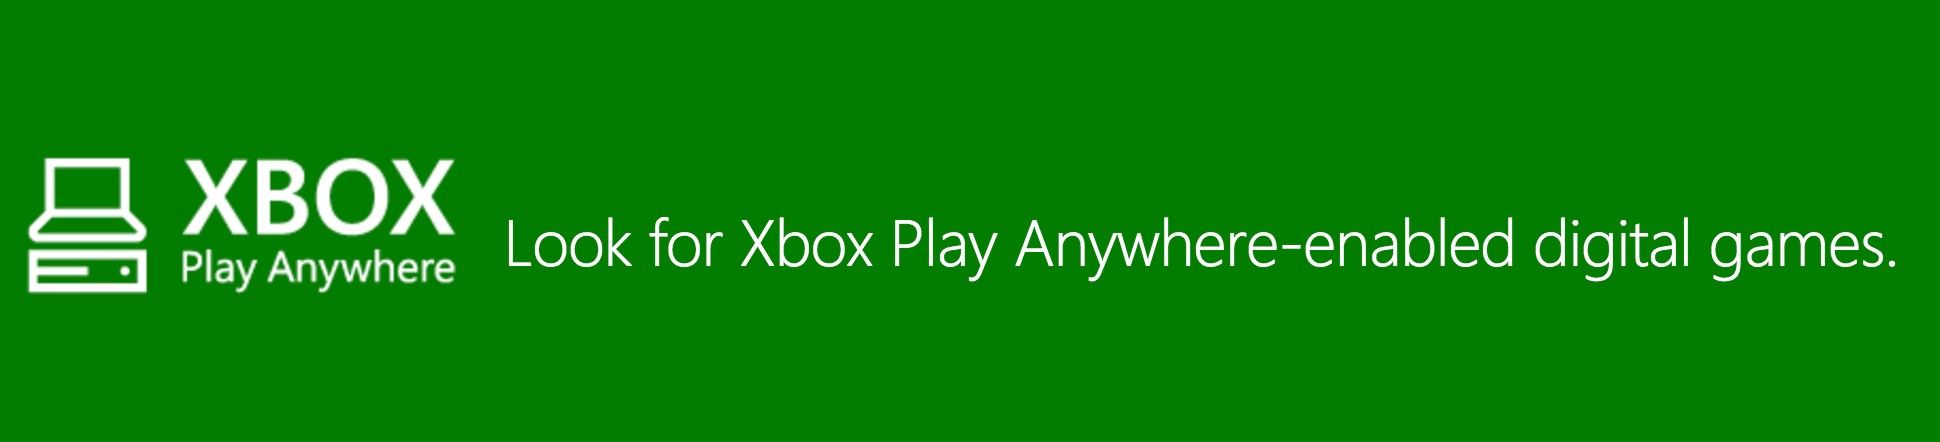 what is xbox play anywhere and when will it be available image 2